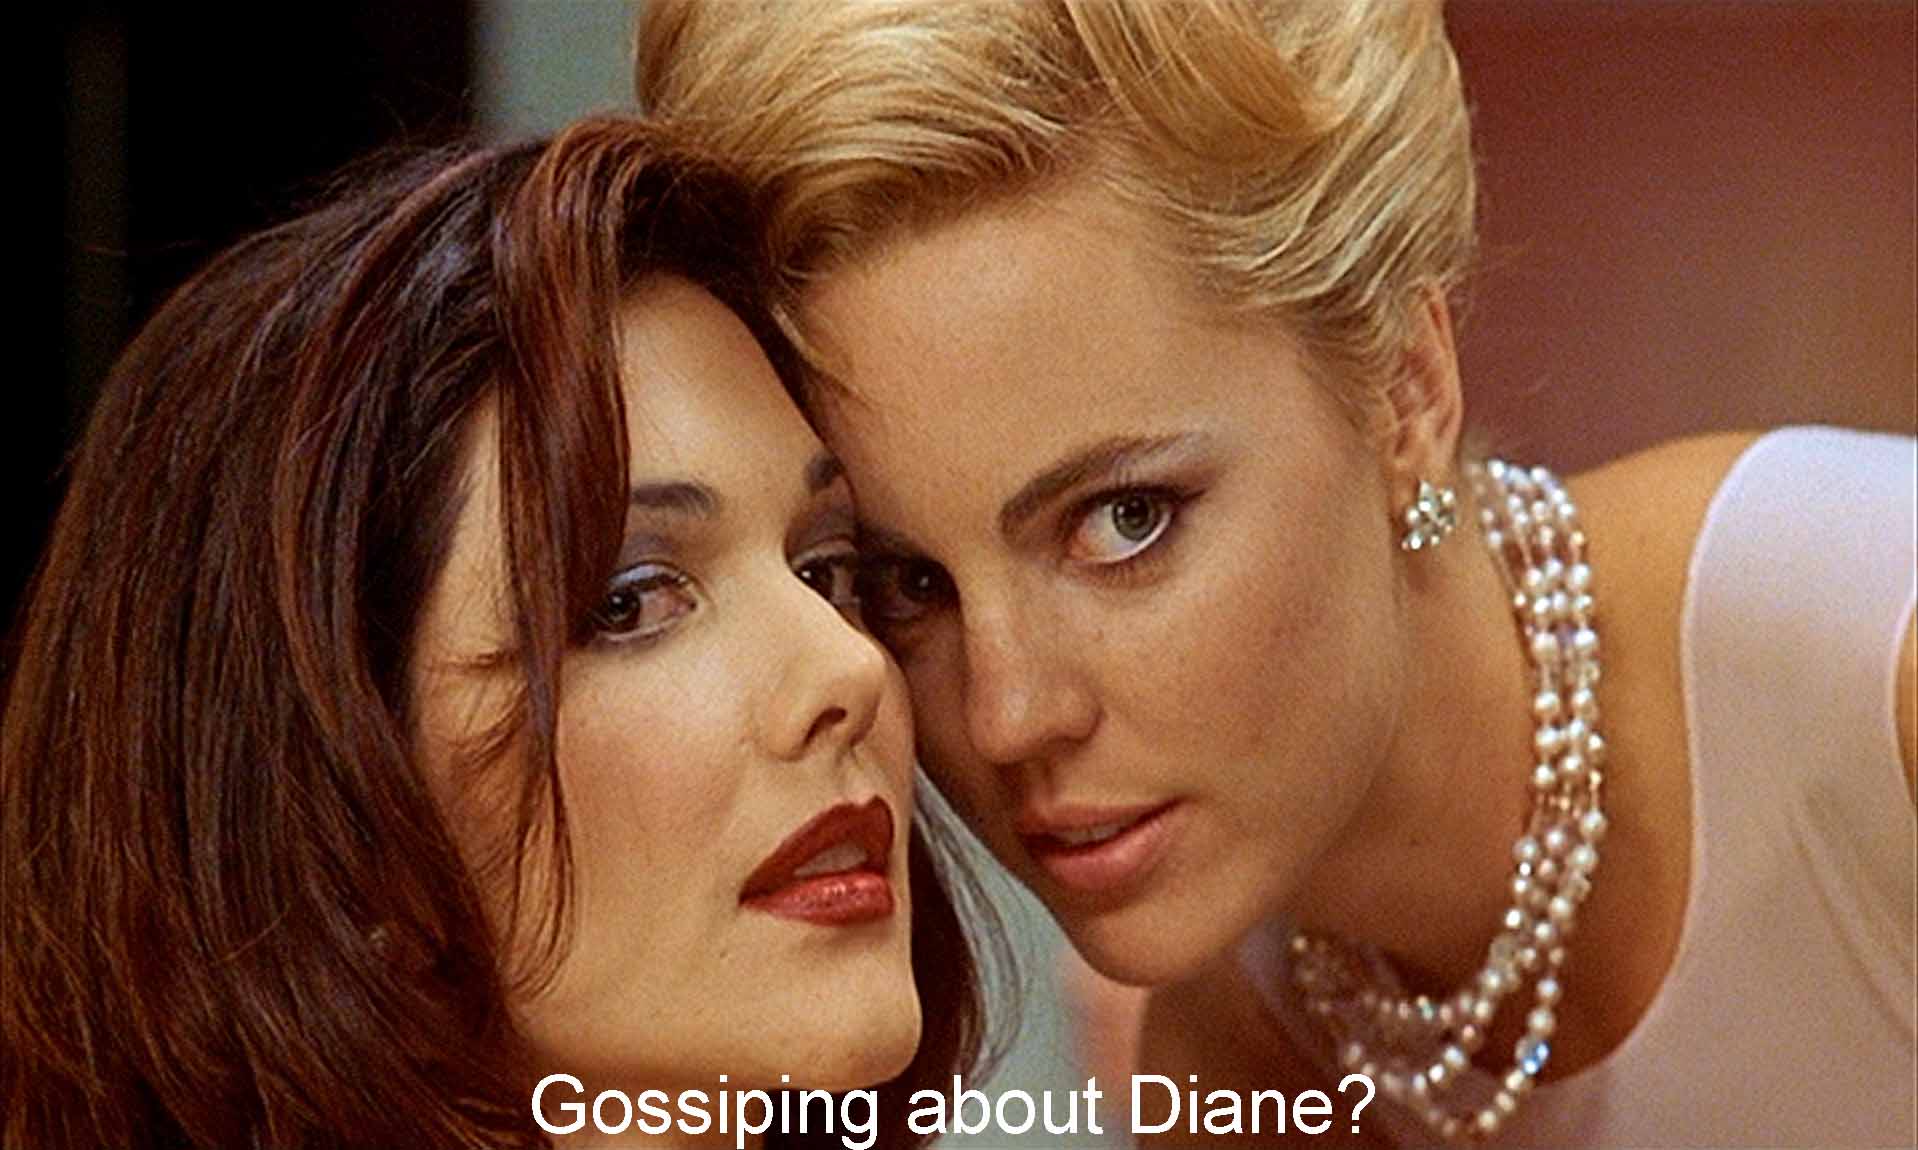 Gossiping about Diane?